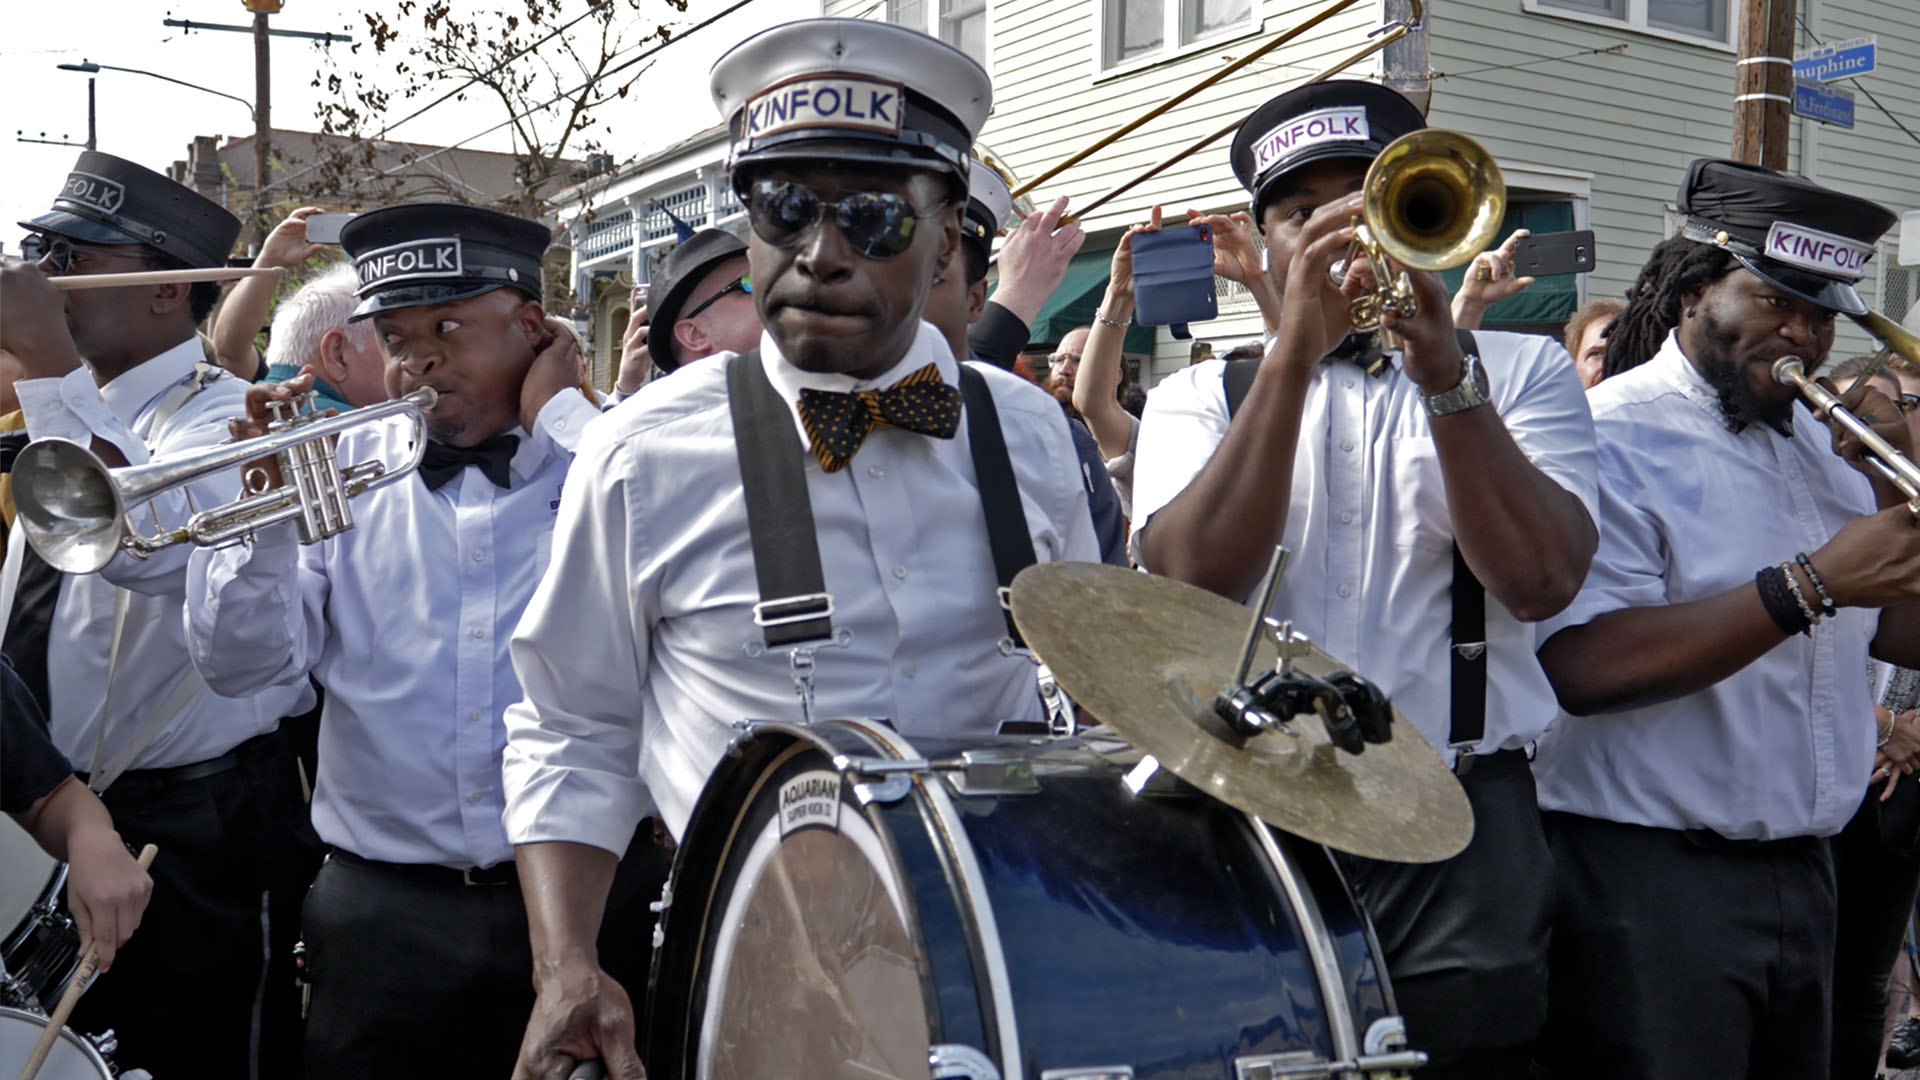 New Orleans band